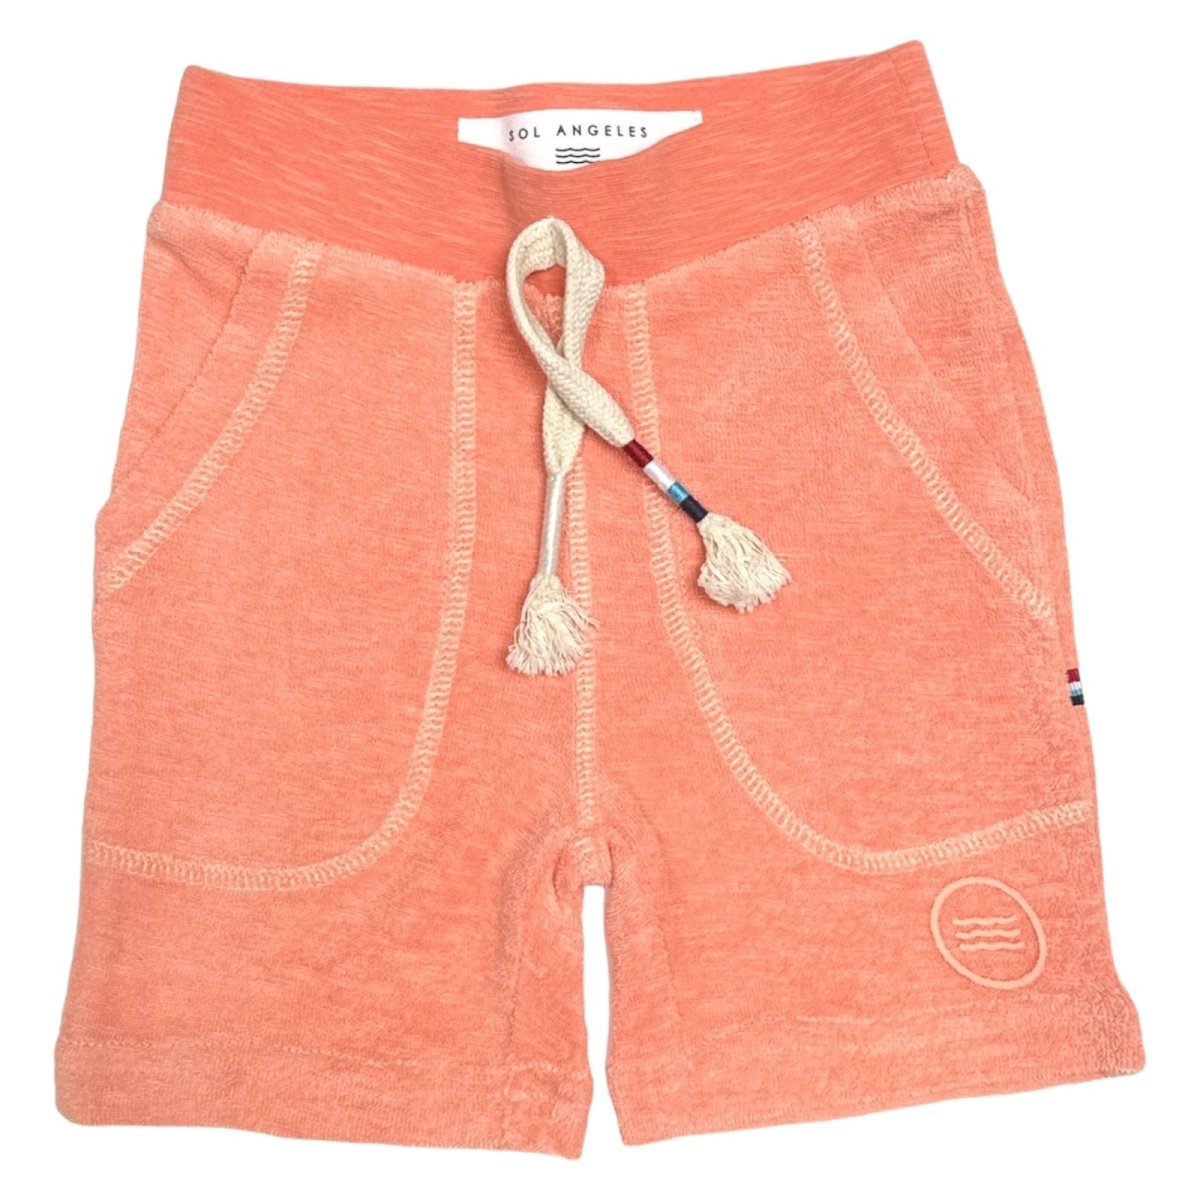 TERRY SHORTS - SOL ANGELES KIDS